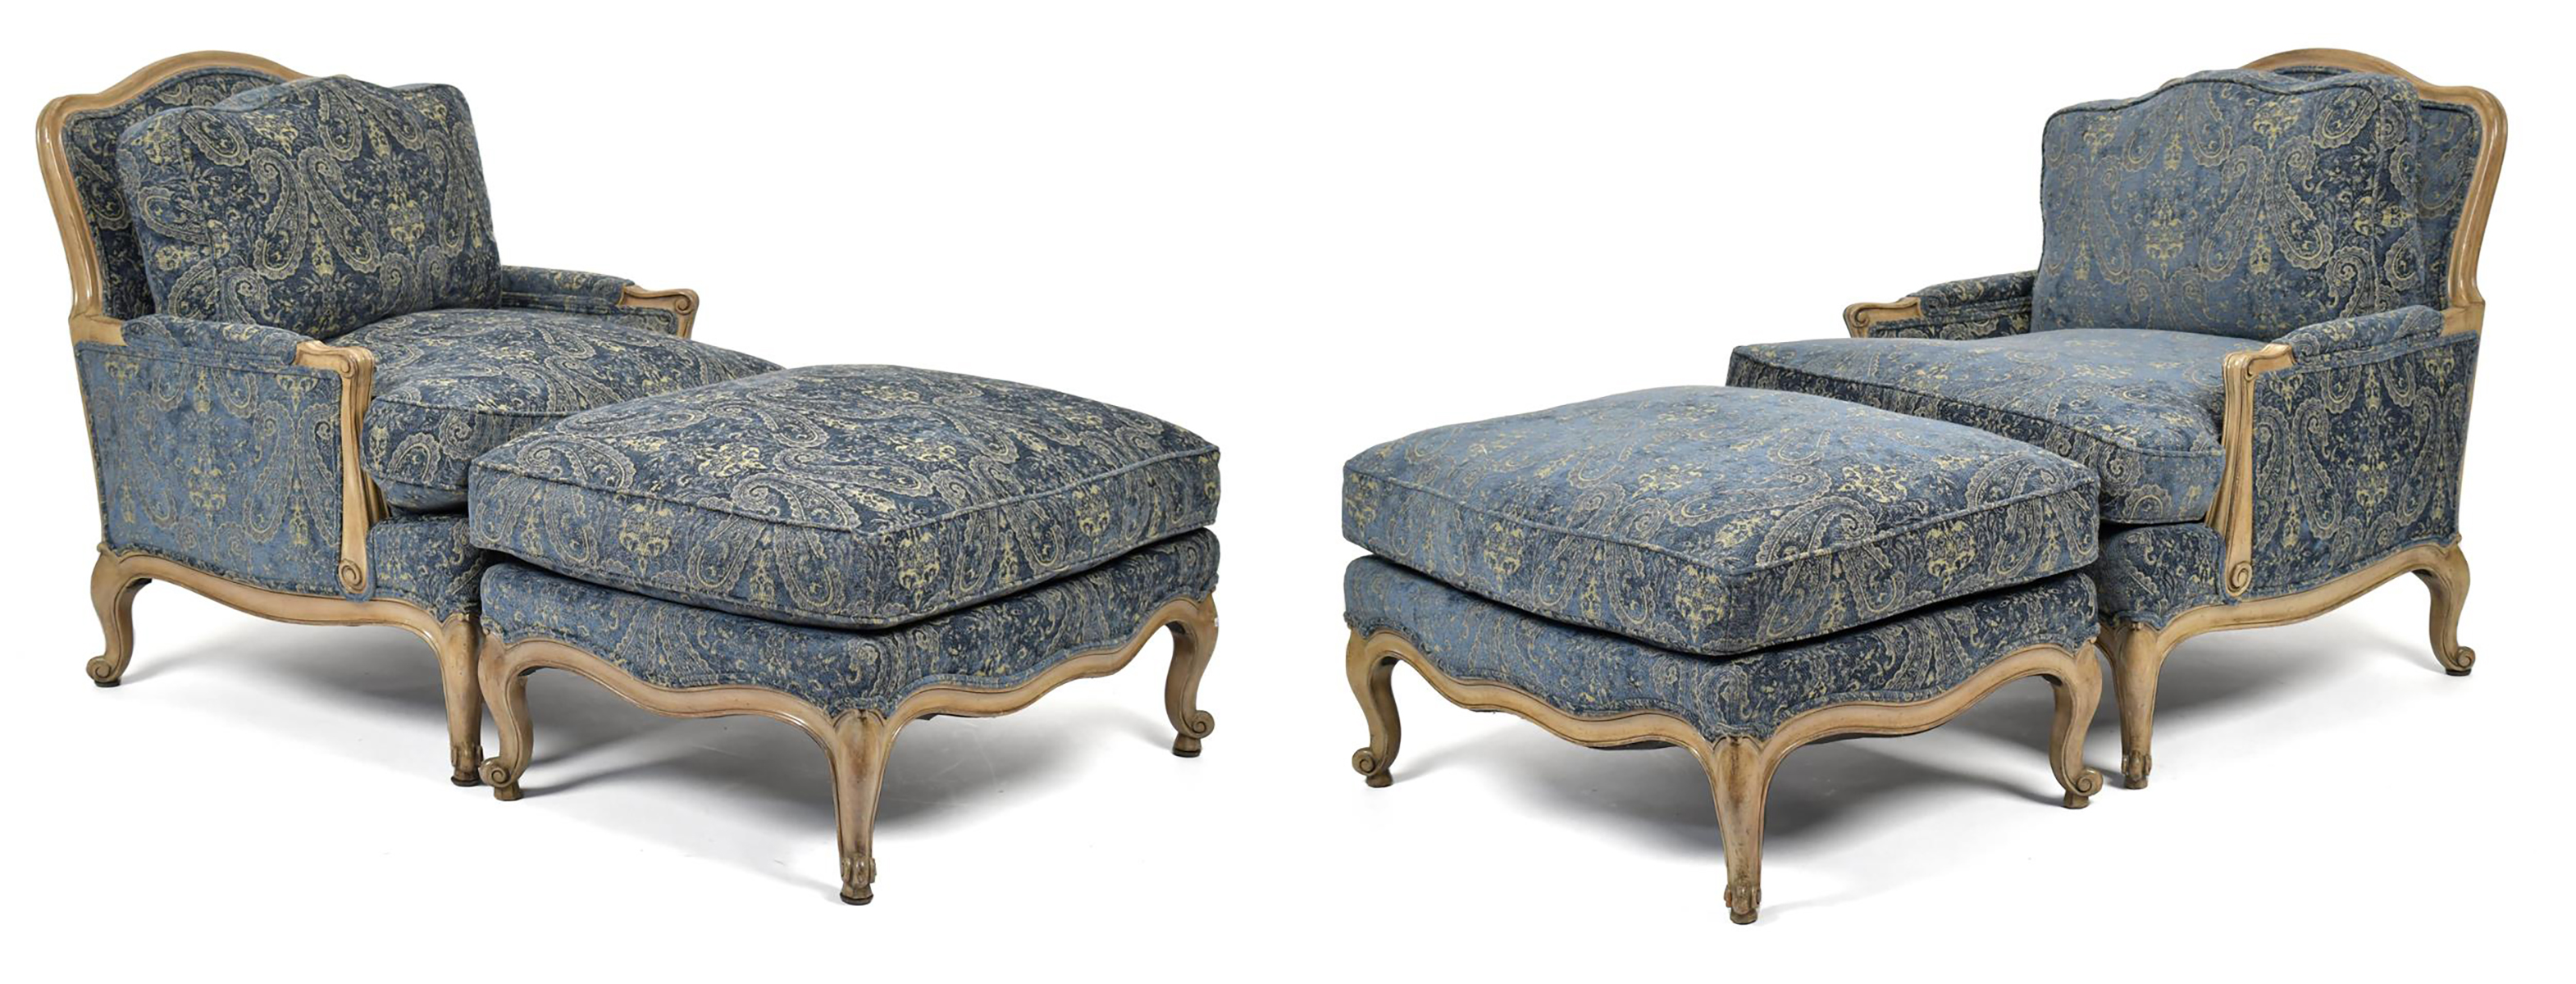 PAIR OF FRENCH STYLE BERGERES WITH